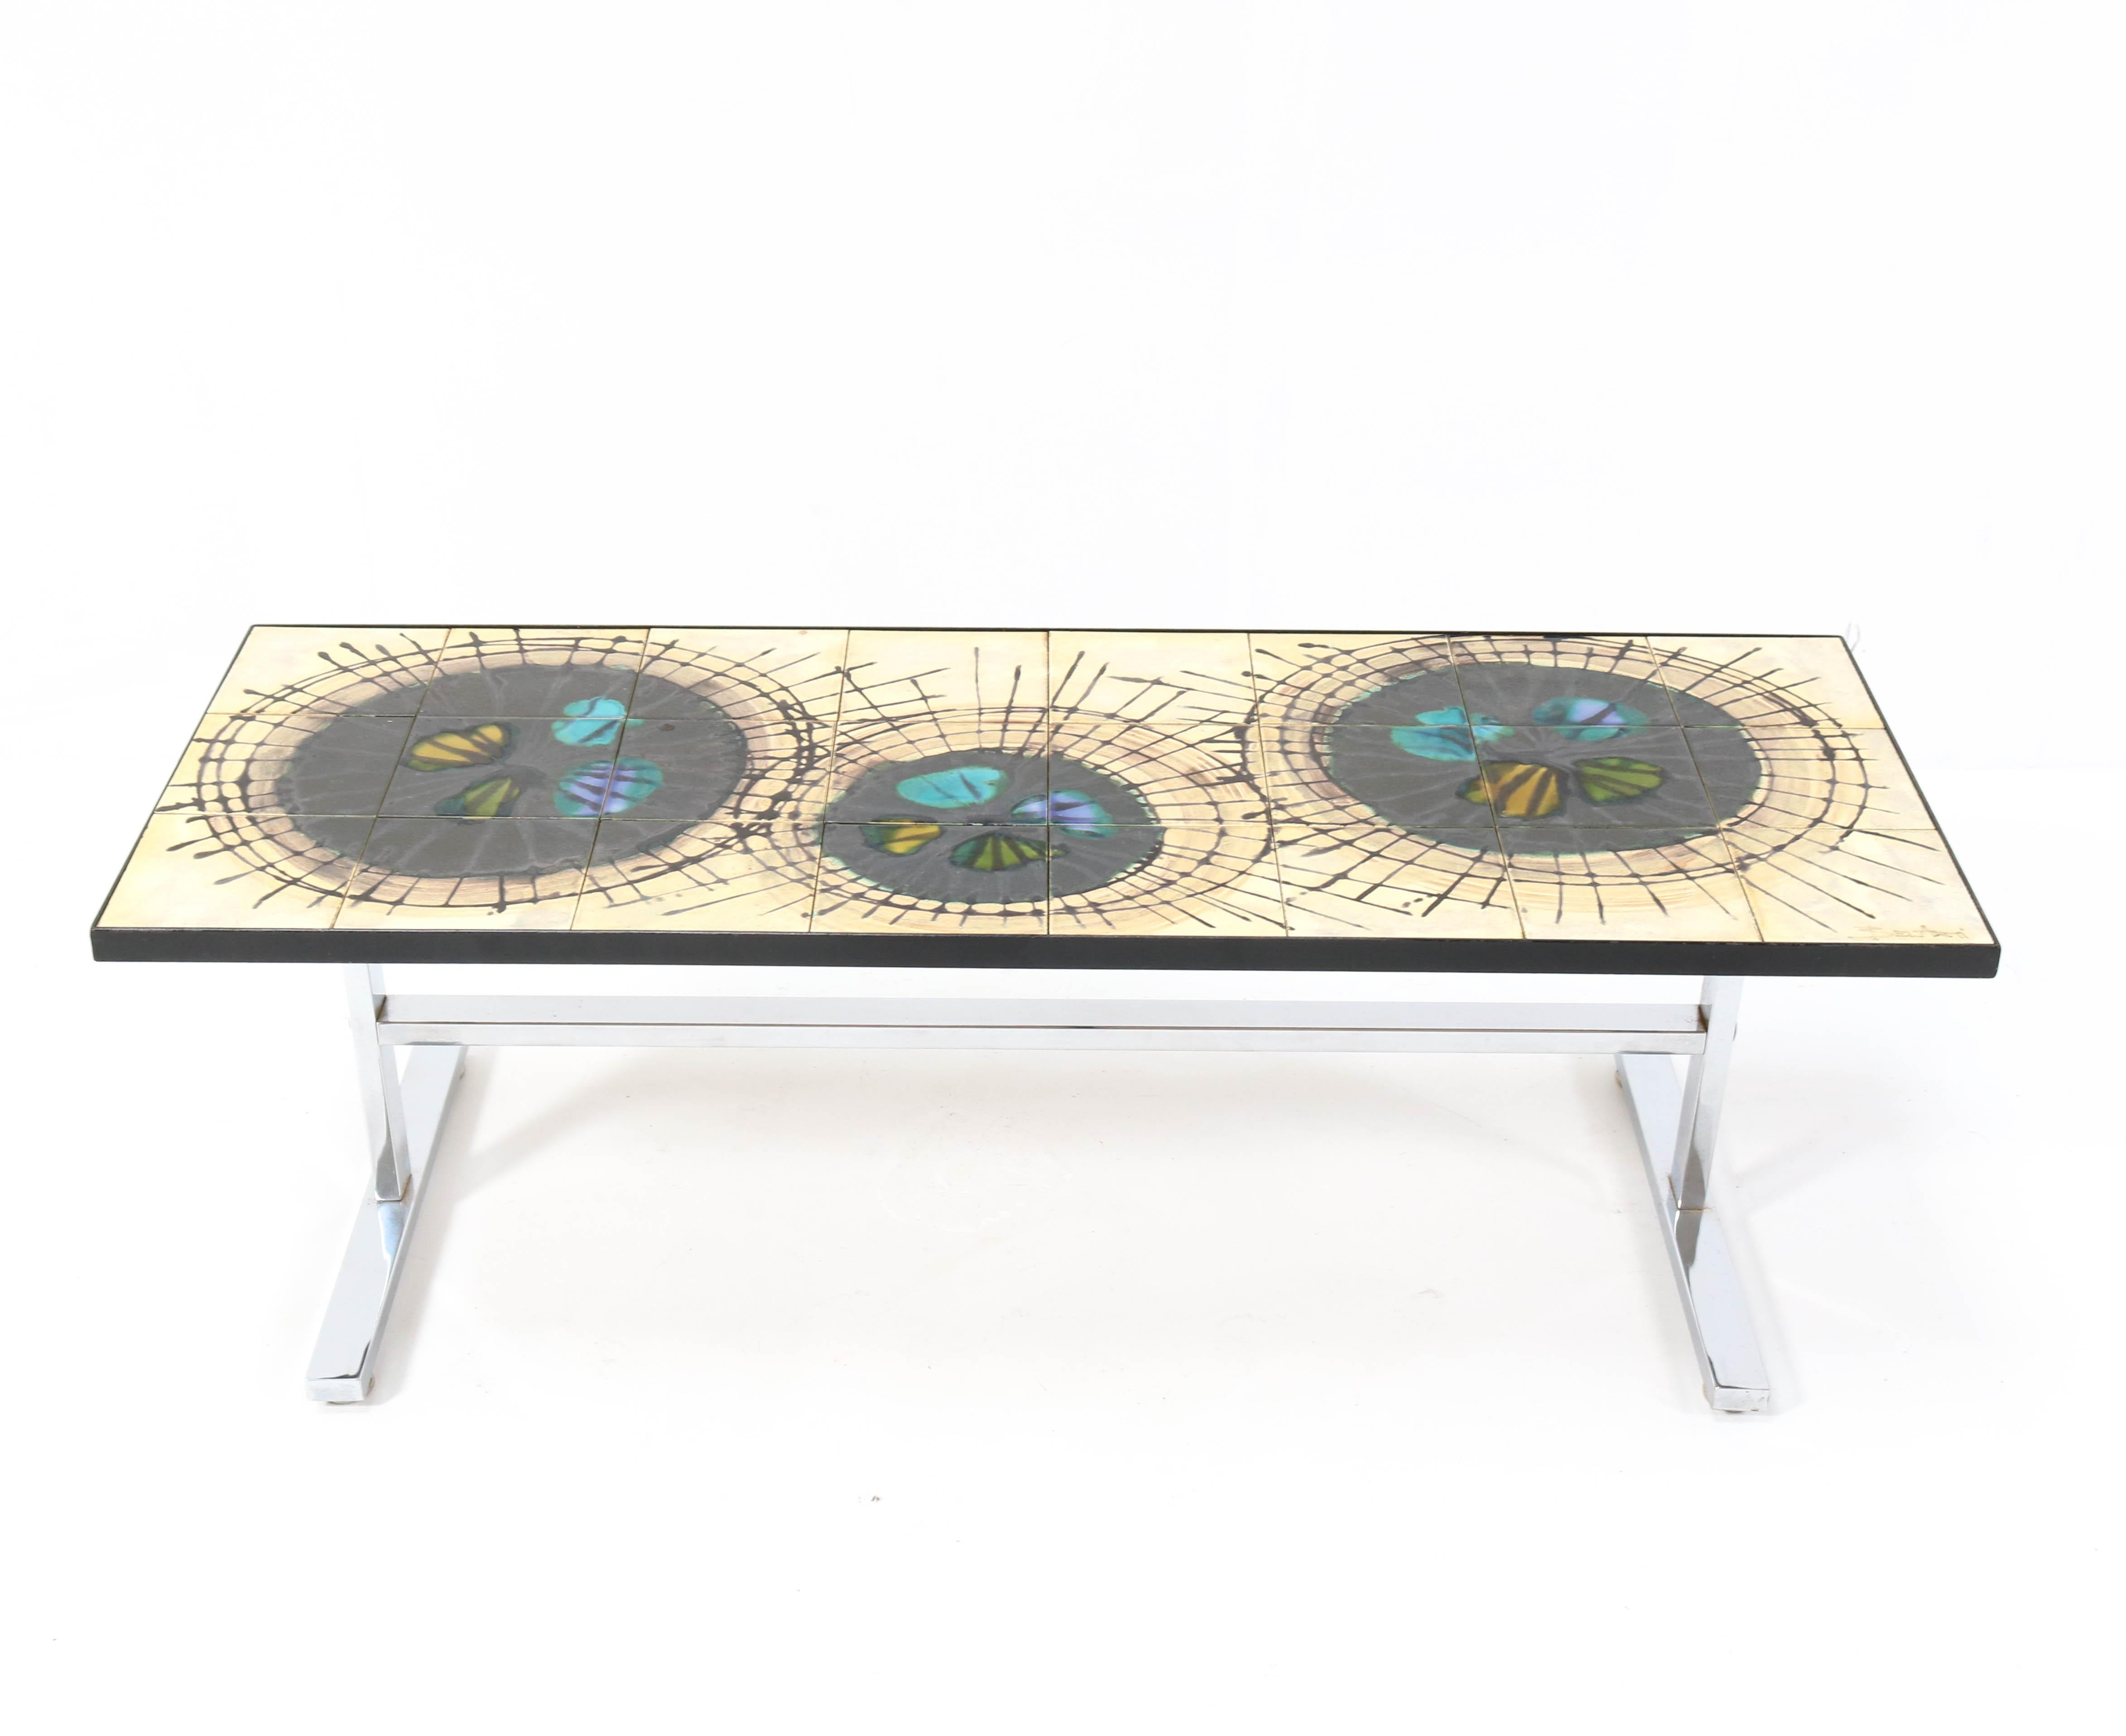 Wonderful Mid-Century Modern coffee table.
Design by Julliette Belarti.
Striking Belgium design from the 1960s.
Chrome plated frame with ceramic tile top.
Marked on the table top.
In good original condition with minor wear consistent with age